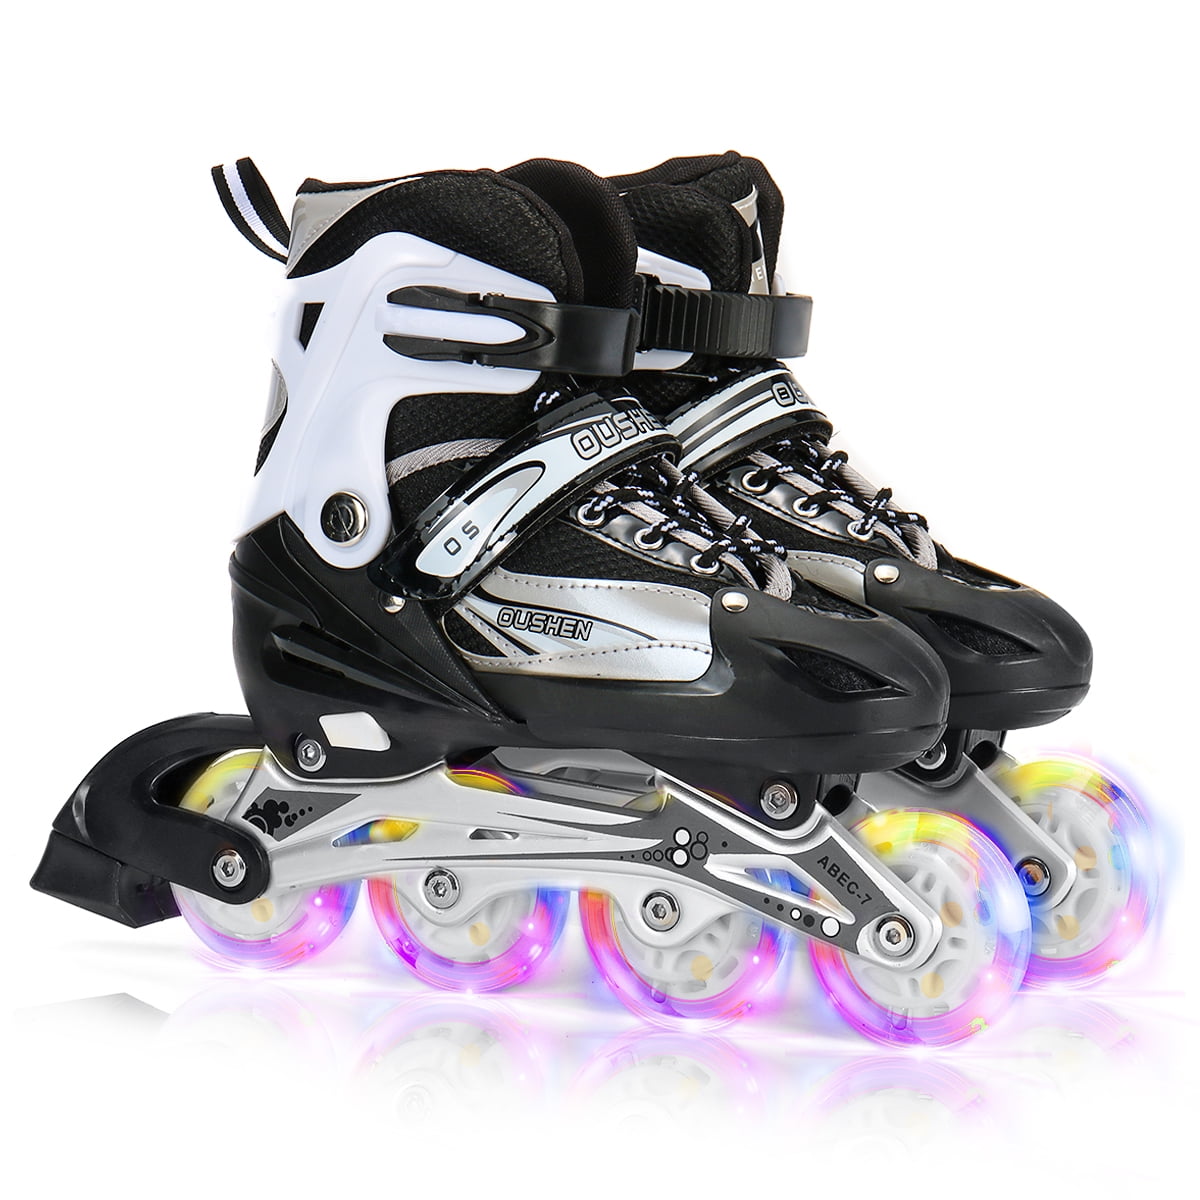 Fashine Adjustable Inline Skates with Flashing Wheel for Kids US Stock Breathable Mesh Inline Rollerblades for Indoor Outdoor 